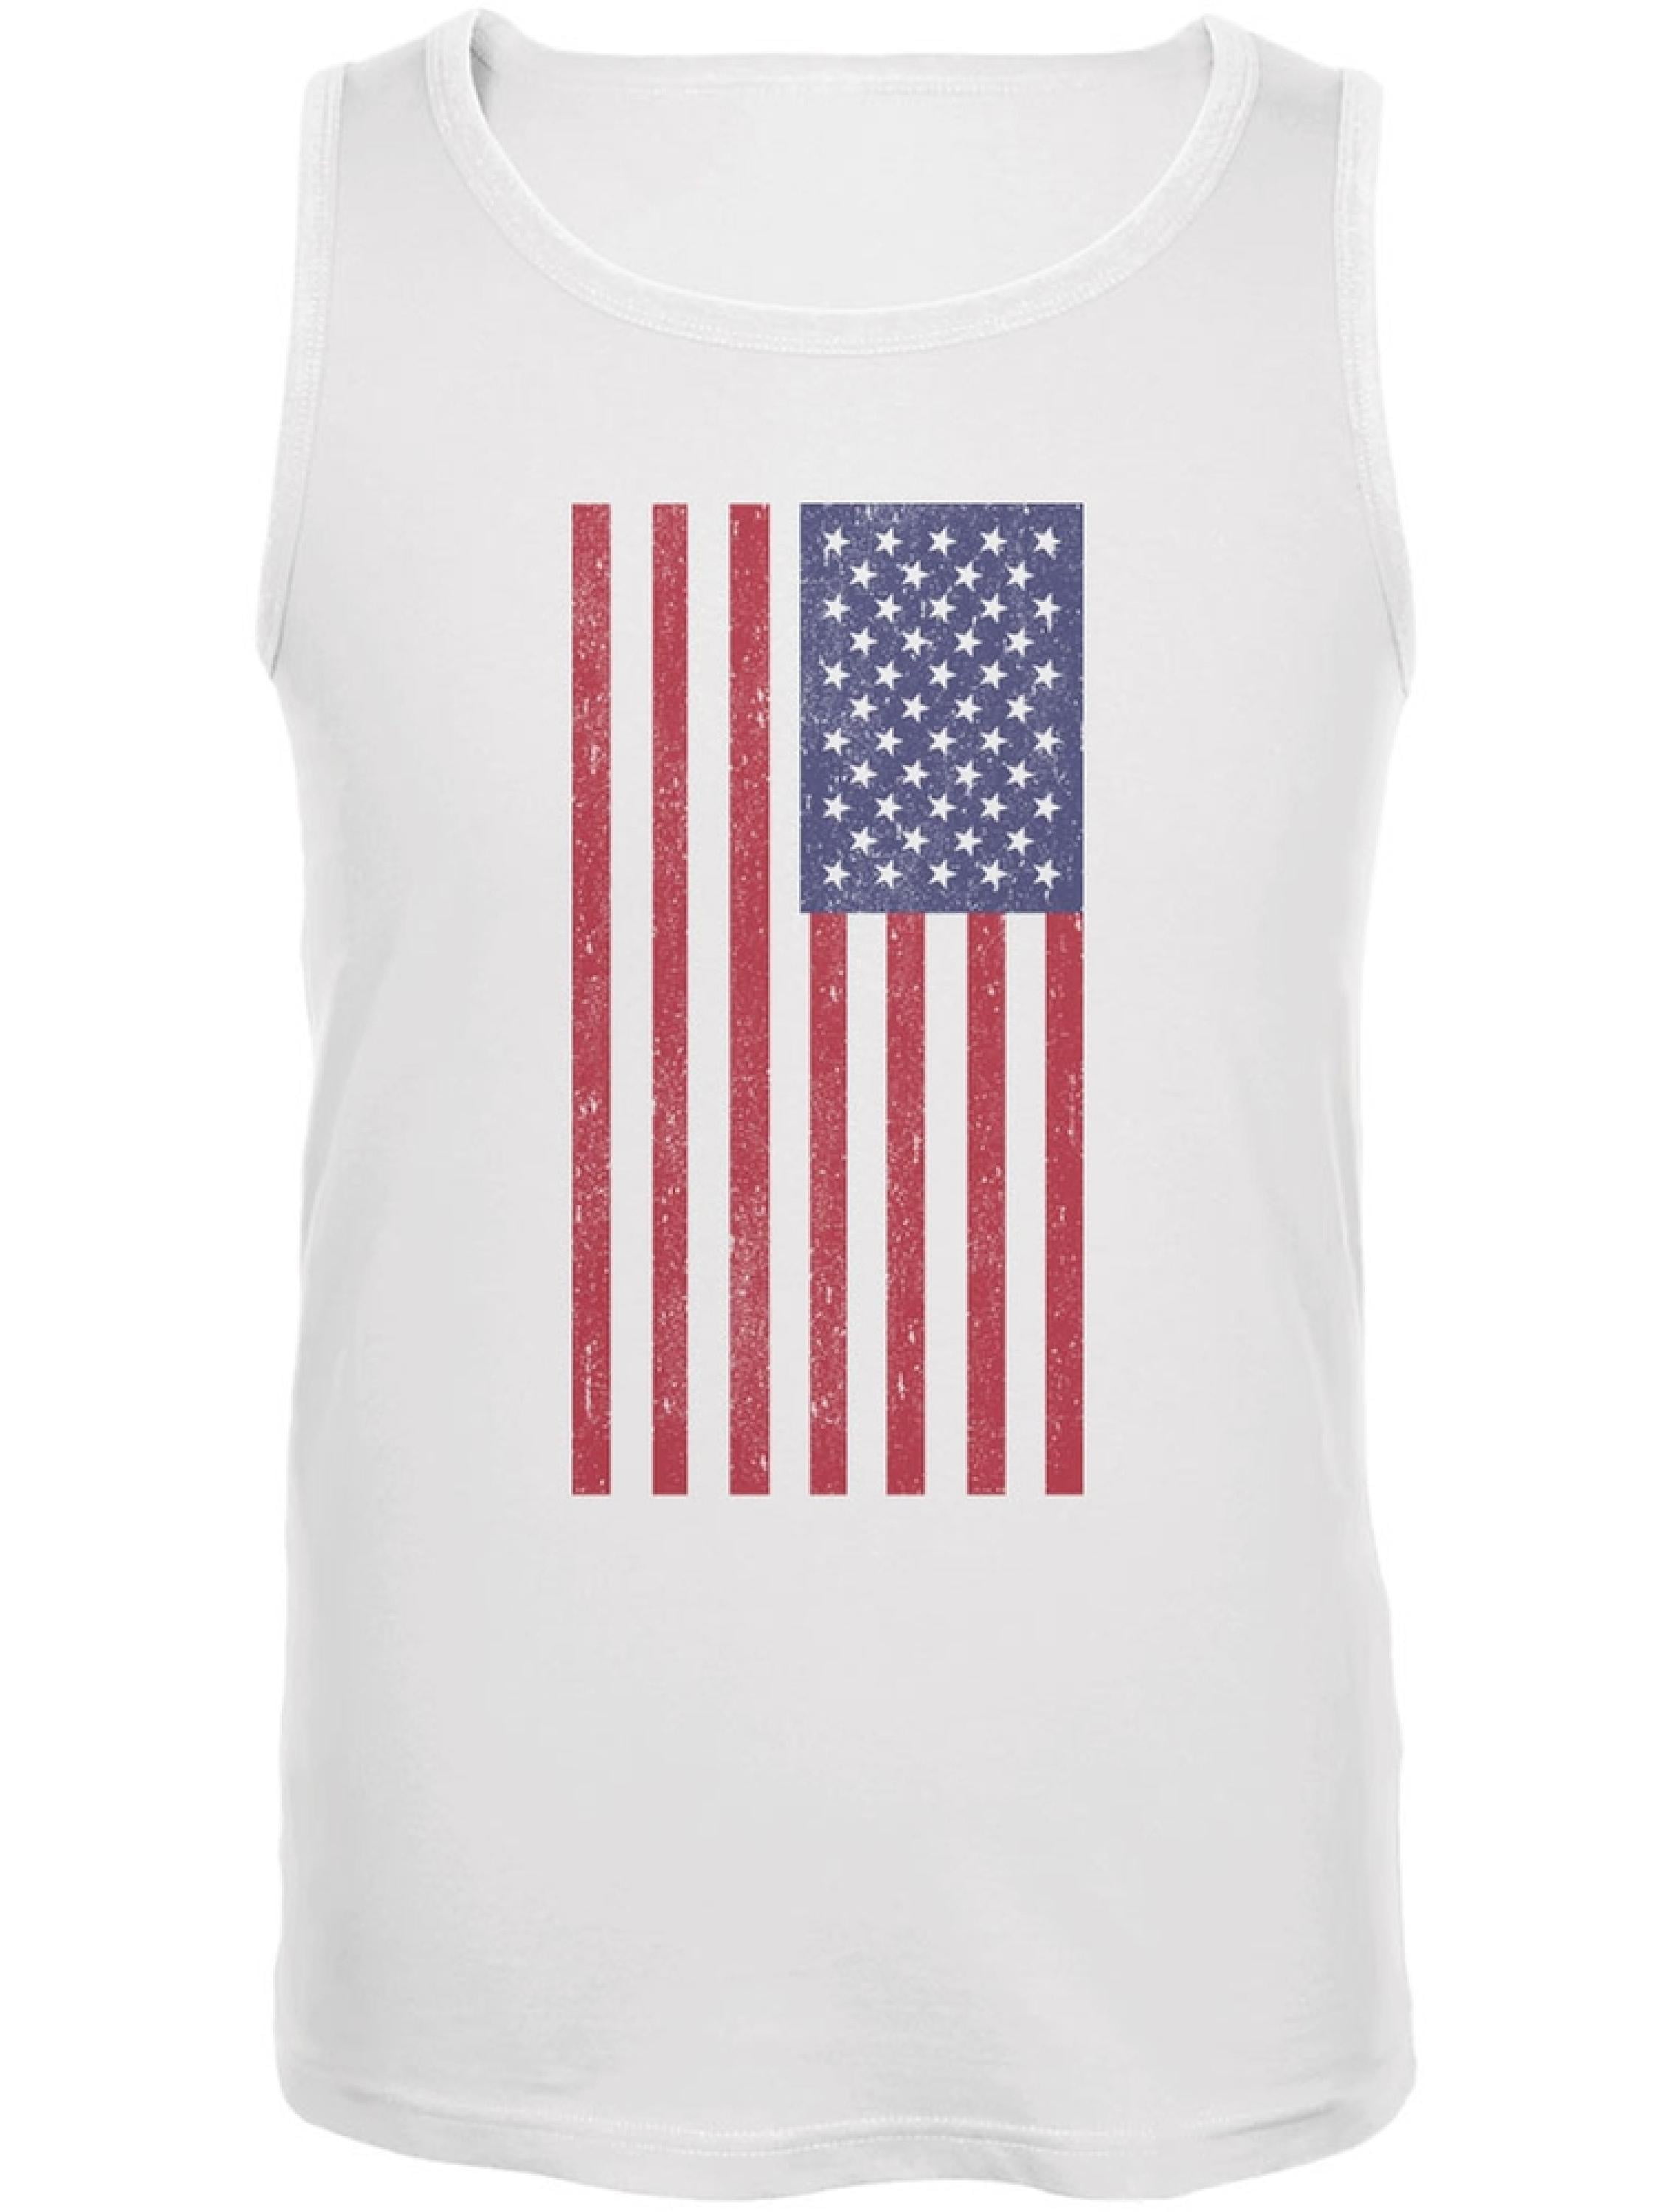 4th Of July Stars and Strings Guitar American Flag White Adult Tank Top 